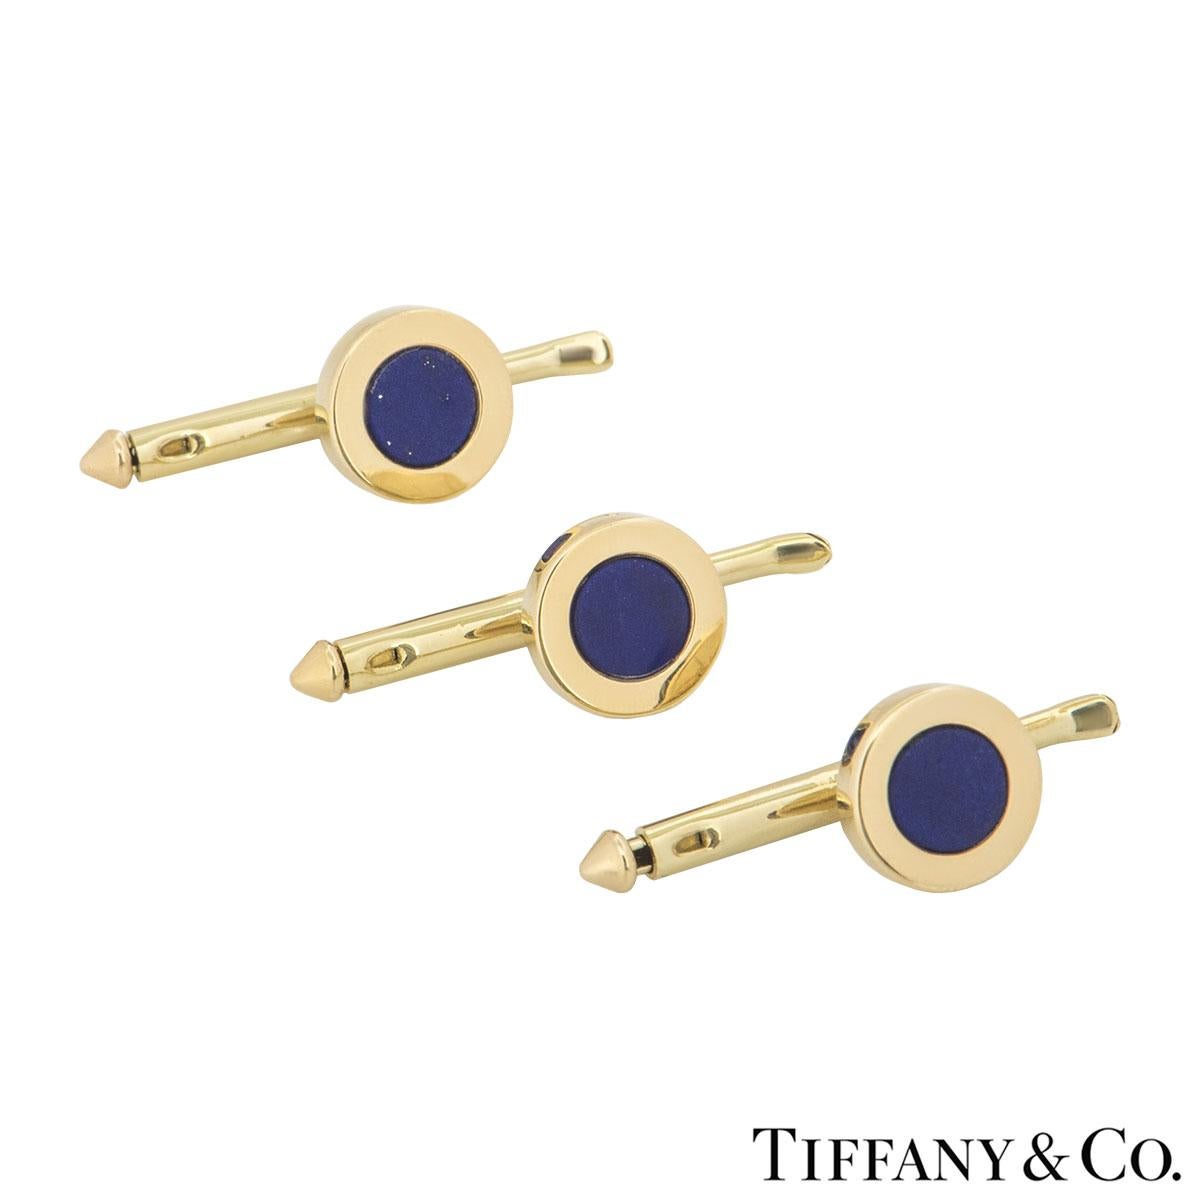 A 14k yellow gold Tiffany & Co. lapis lazuli pair of cufflinks and dress studs set. The pair of cufflinks feature 2 lapis lazuli discs set with a bar spacer with three similarly designed dress studs also set with lapis lazuli discs. The cufflinks